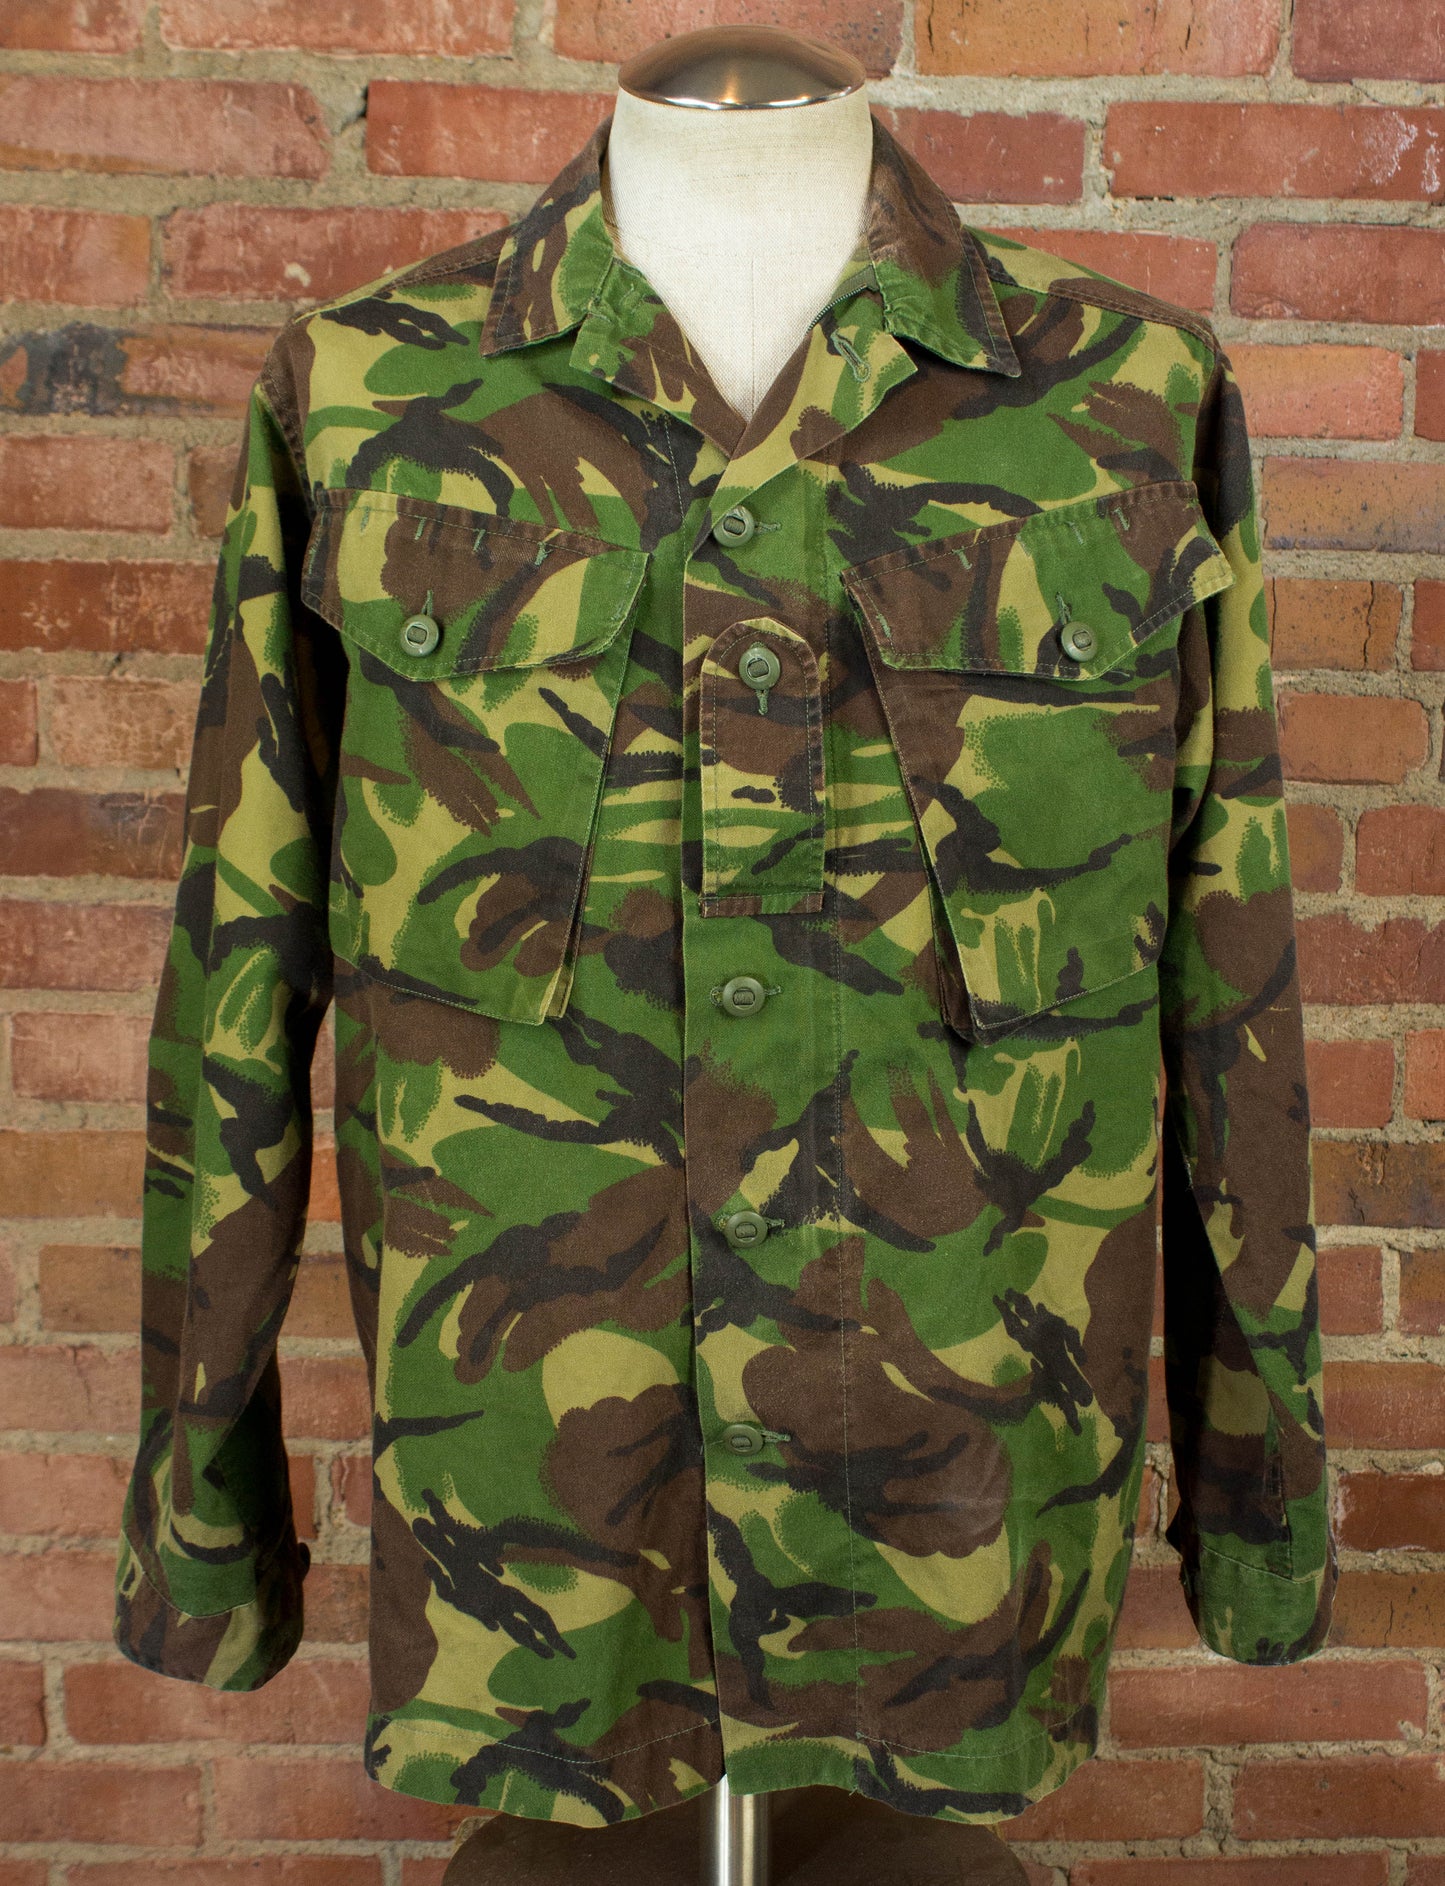 Vintage British Army DPM Camo Combat Jacket With Metallica Patch 90s Customized By Dead End Career Club Large